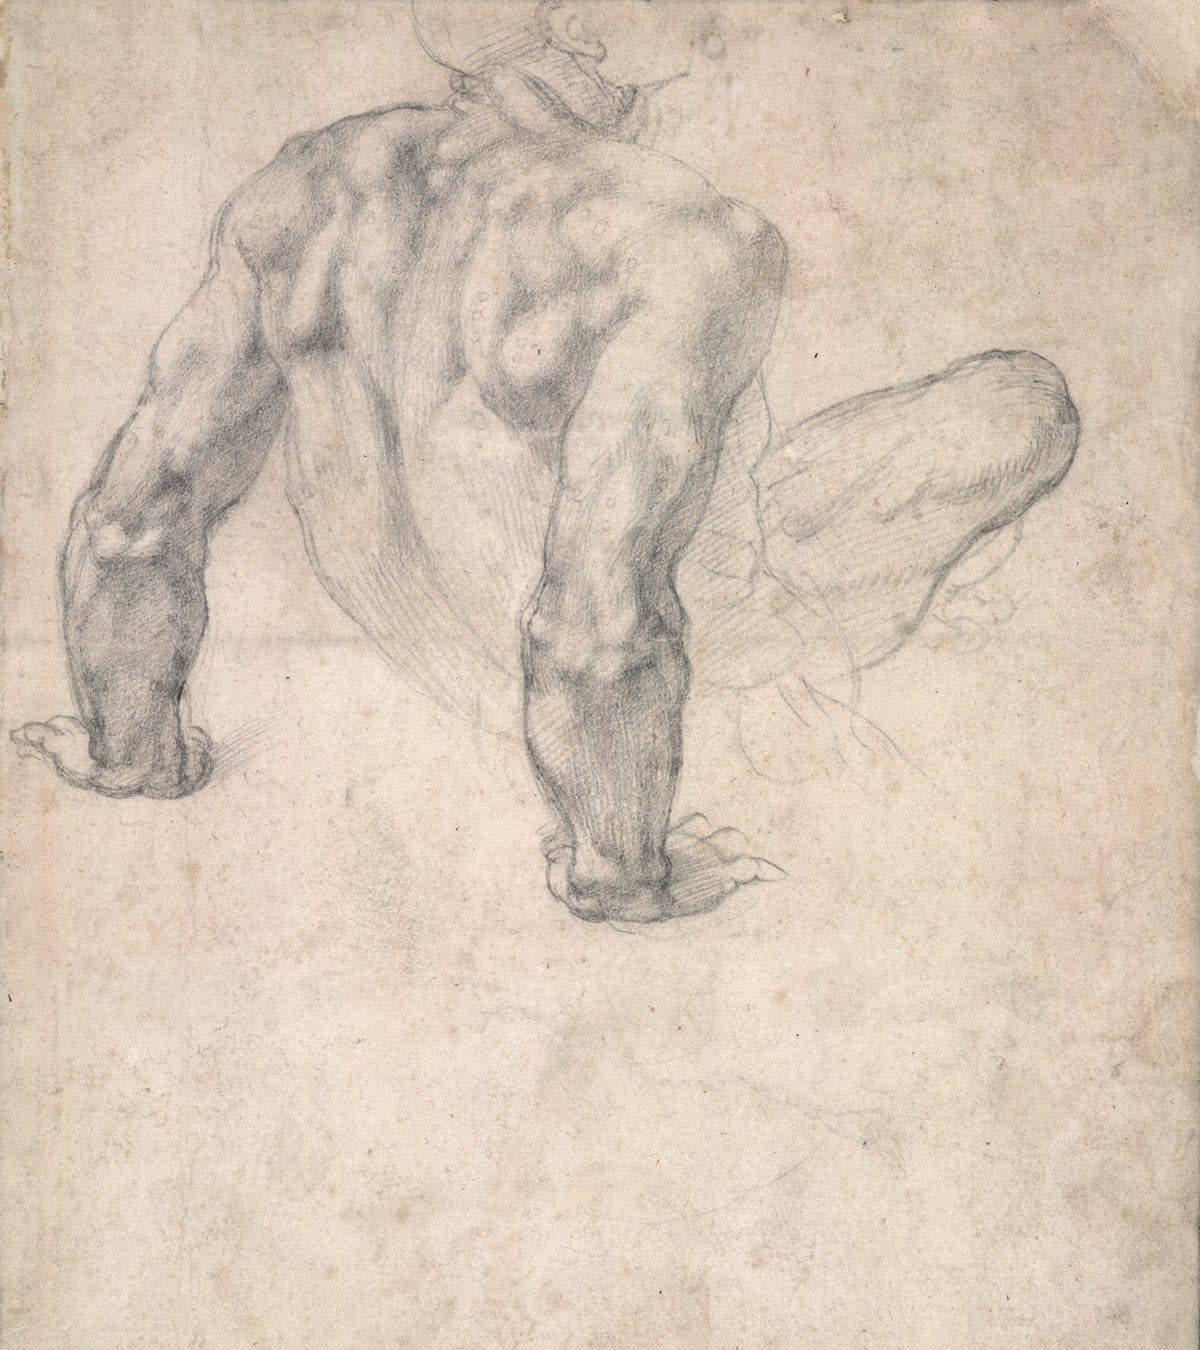 A study of the Last Judgment by Michelangelo (The Trustees of the British Museum)